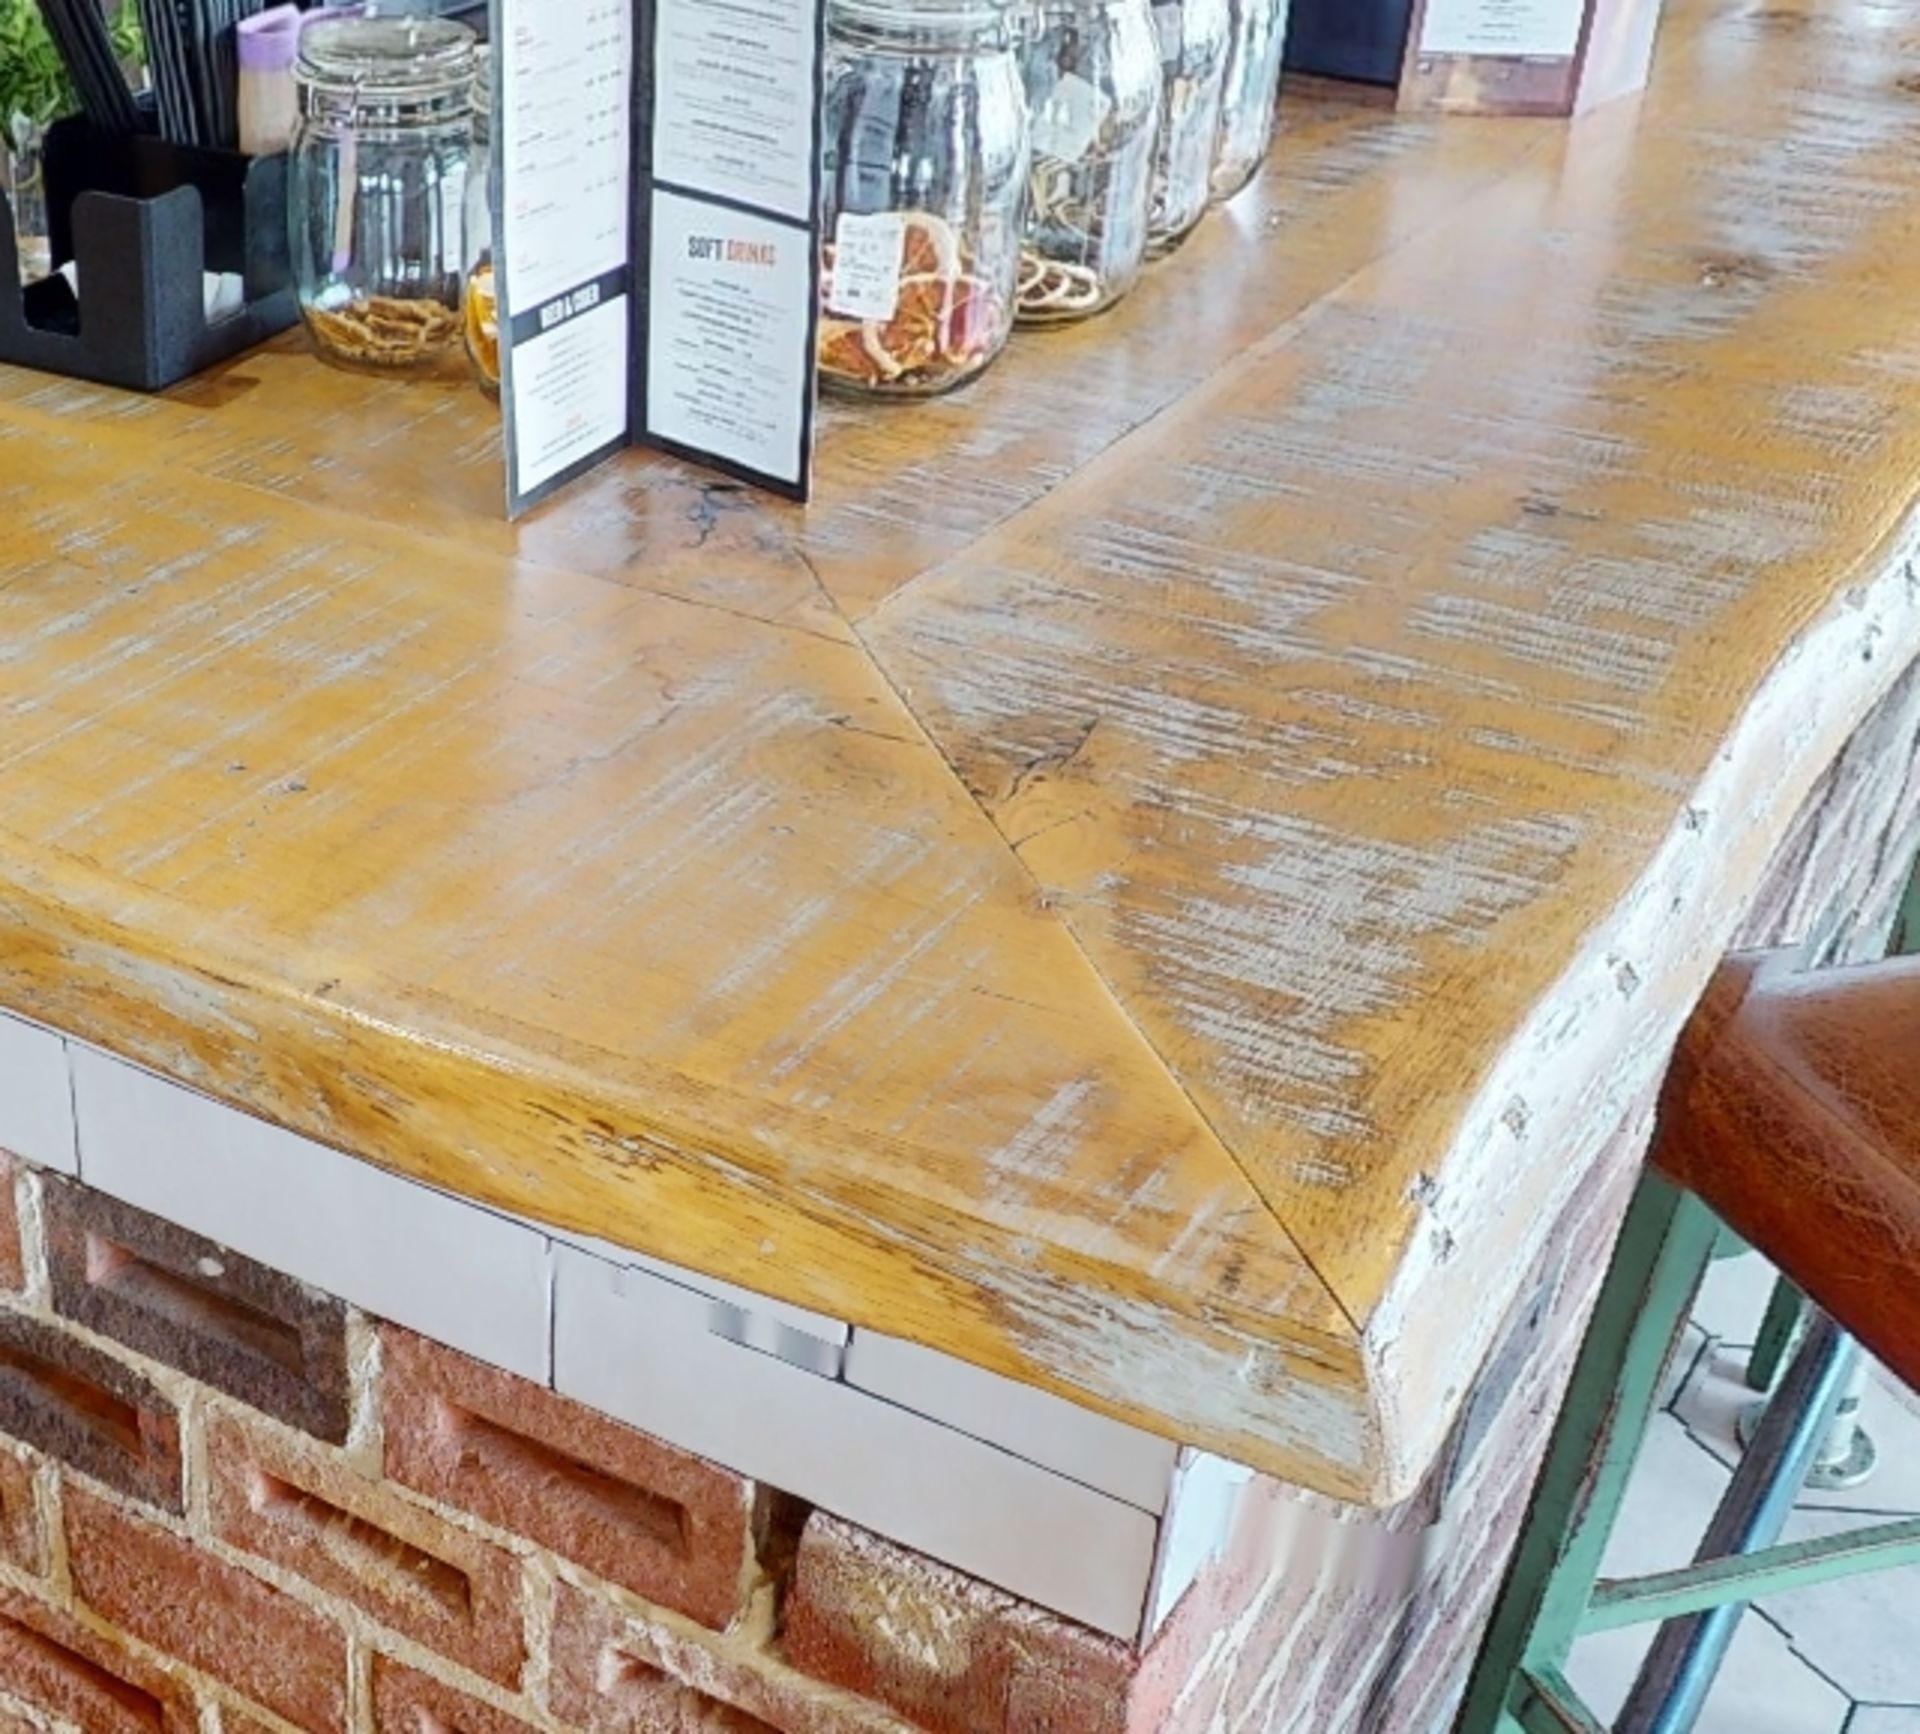 1 x Rustic Knotty Oak L Shaped Bar Top With an Earthy Finish and Live Edge - Approx 22ft in Legth! - Image 14 of 16